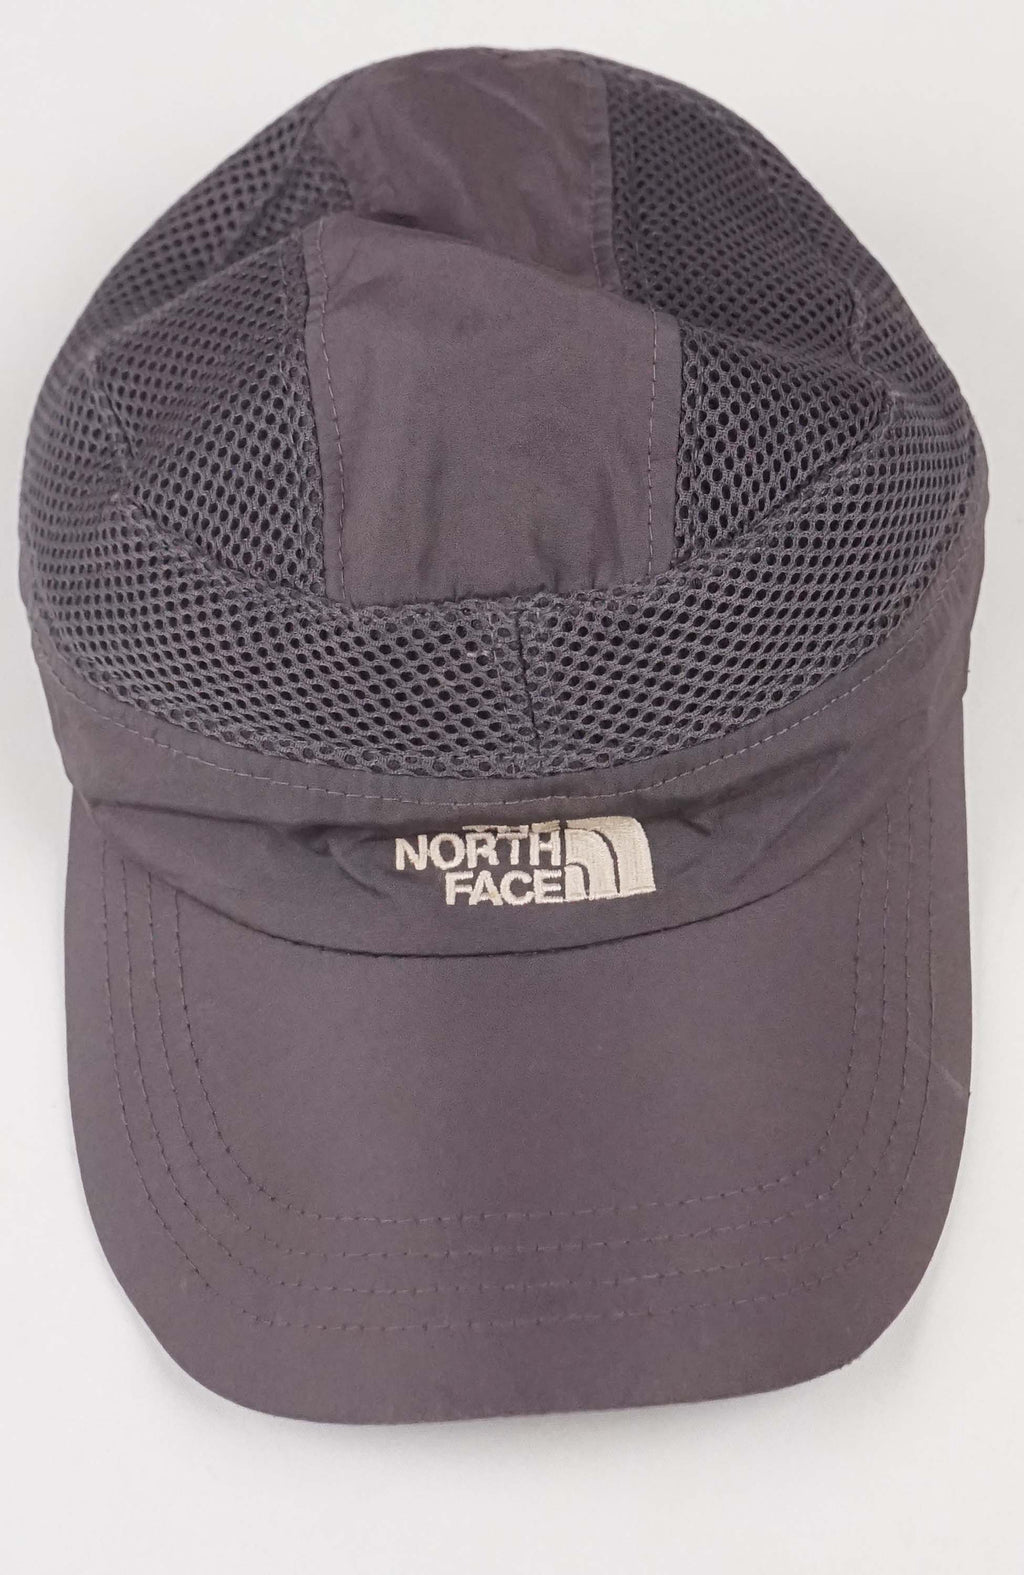 VINTAGE THE NORTH FACE HAT